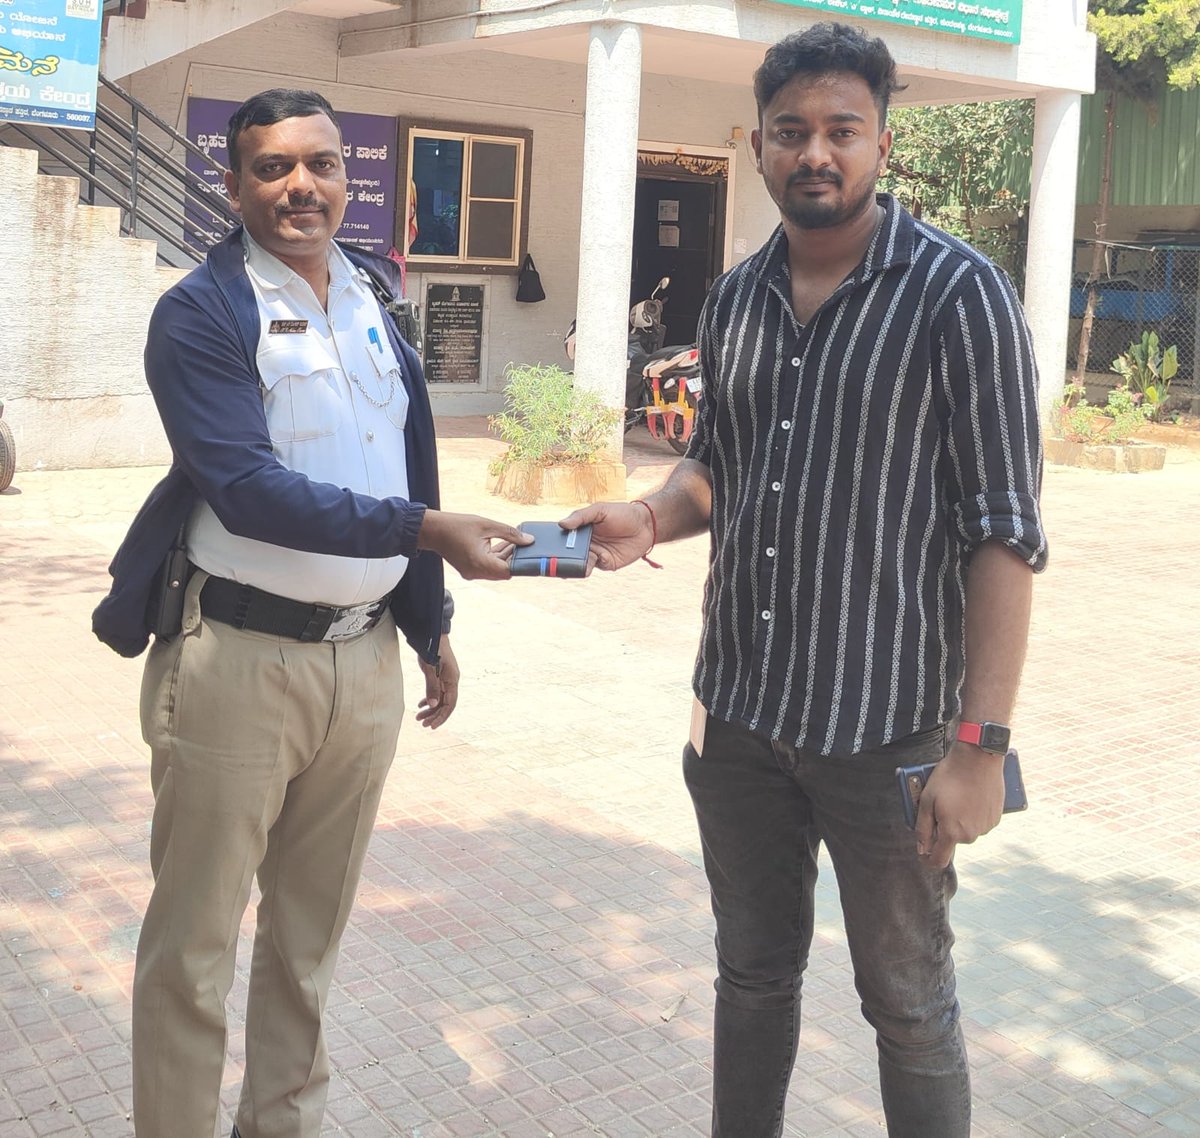 'Kudos to Mr. Mohan from our cobra staff for exemplifying honesty and integrity today! He found a wallet with important documents and money, tracked down the rightful owner, and returned it at Anjaneya Junction. A true testament to the power of kindness! #GoodDeed #Honesty